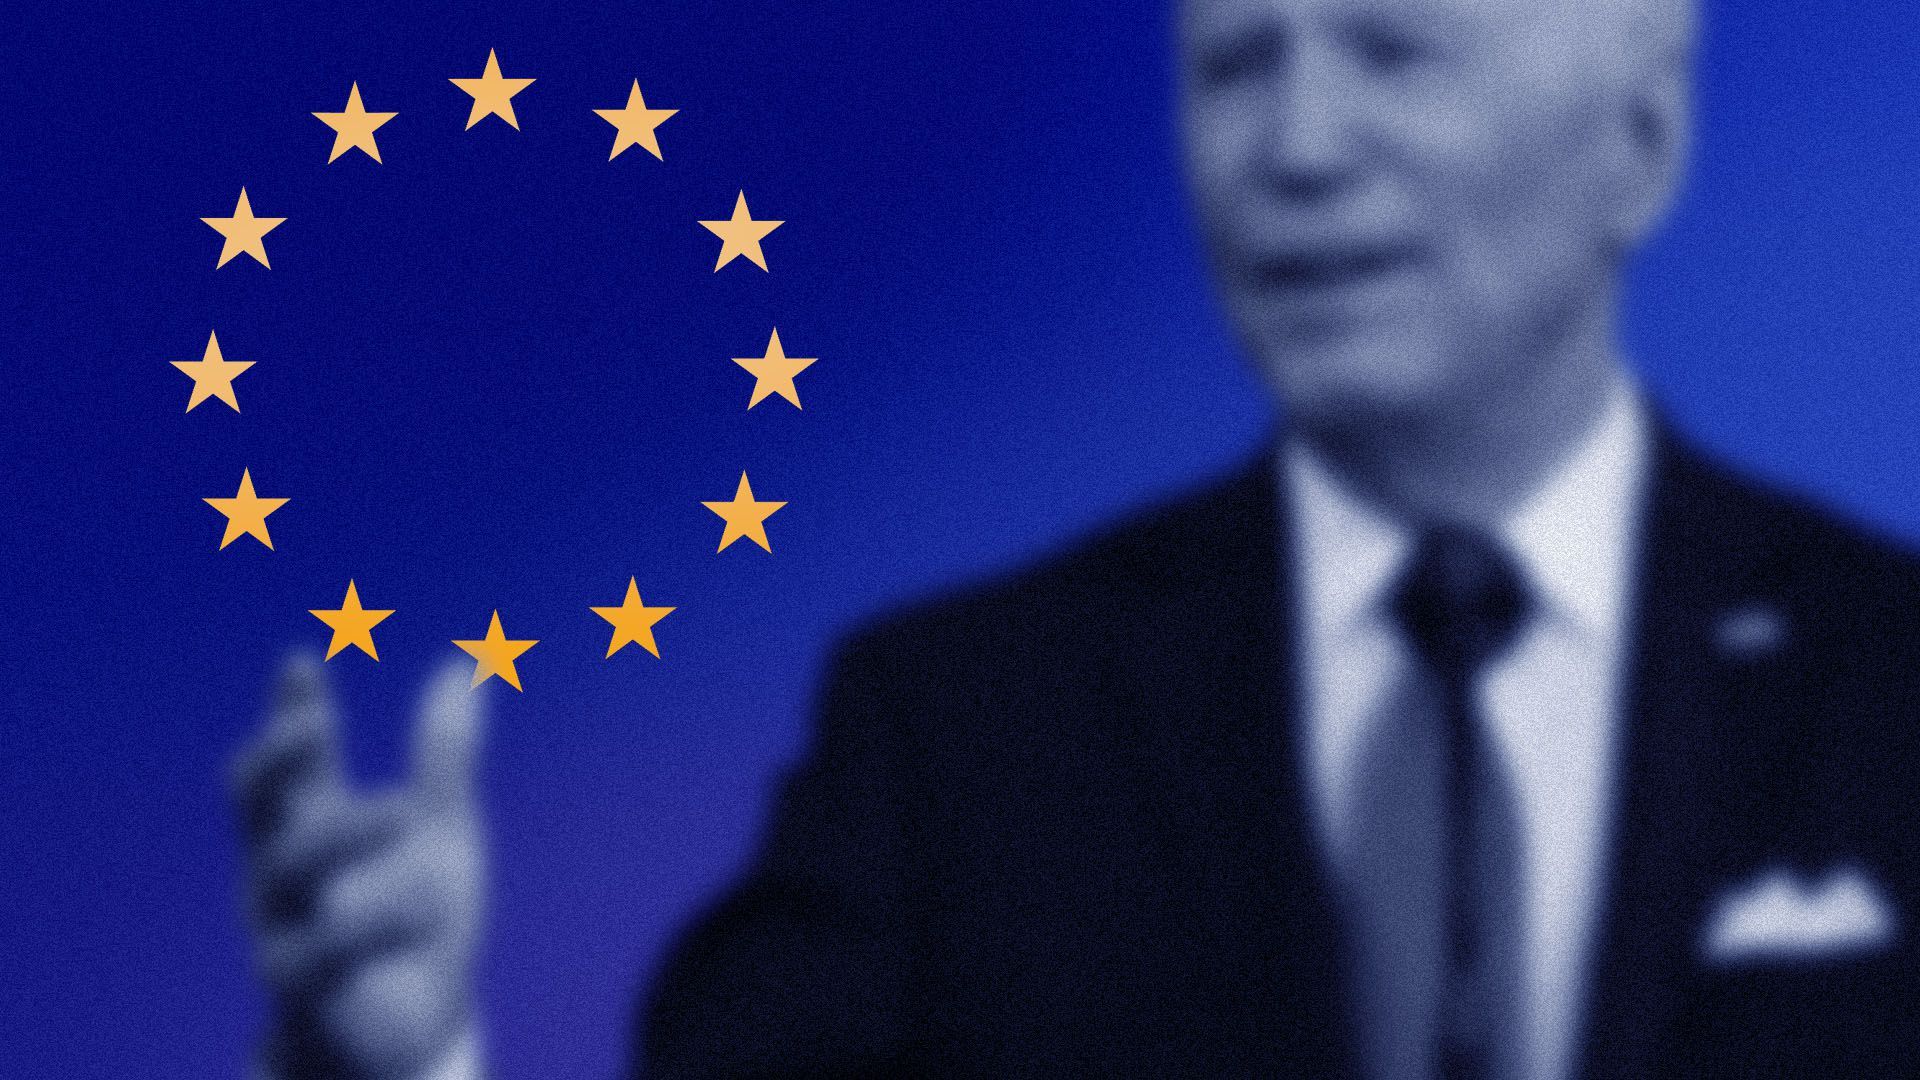 Photo illustration of a blurry President Biden with the EU stars in the background